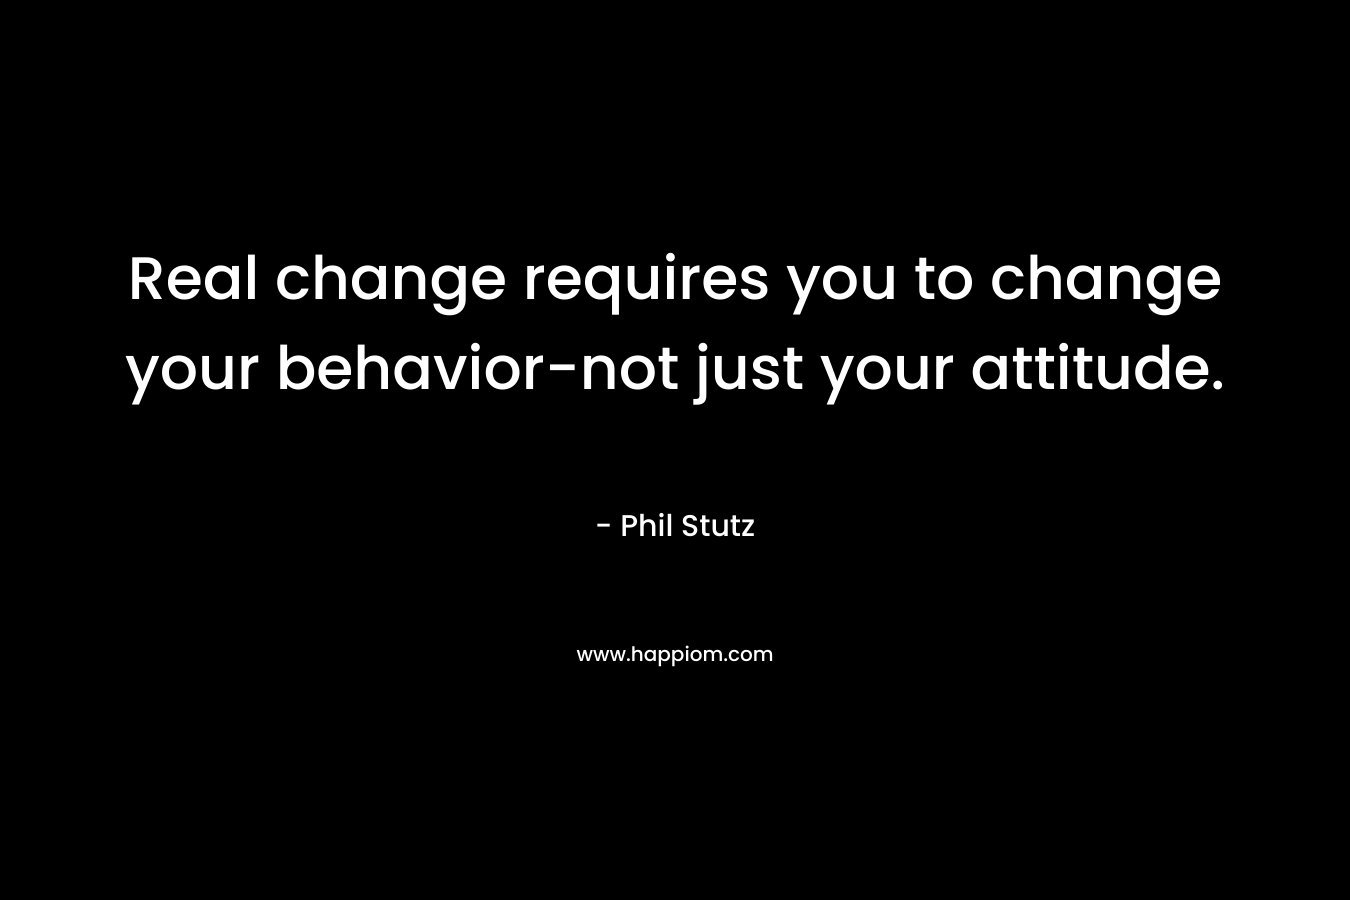 Real change requires you to change your behavior-not just your attitude.